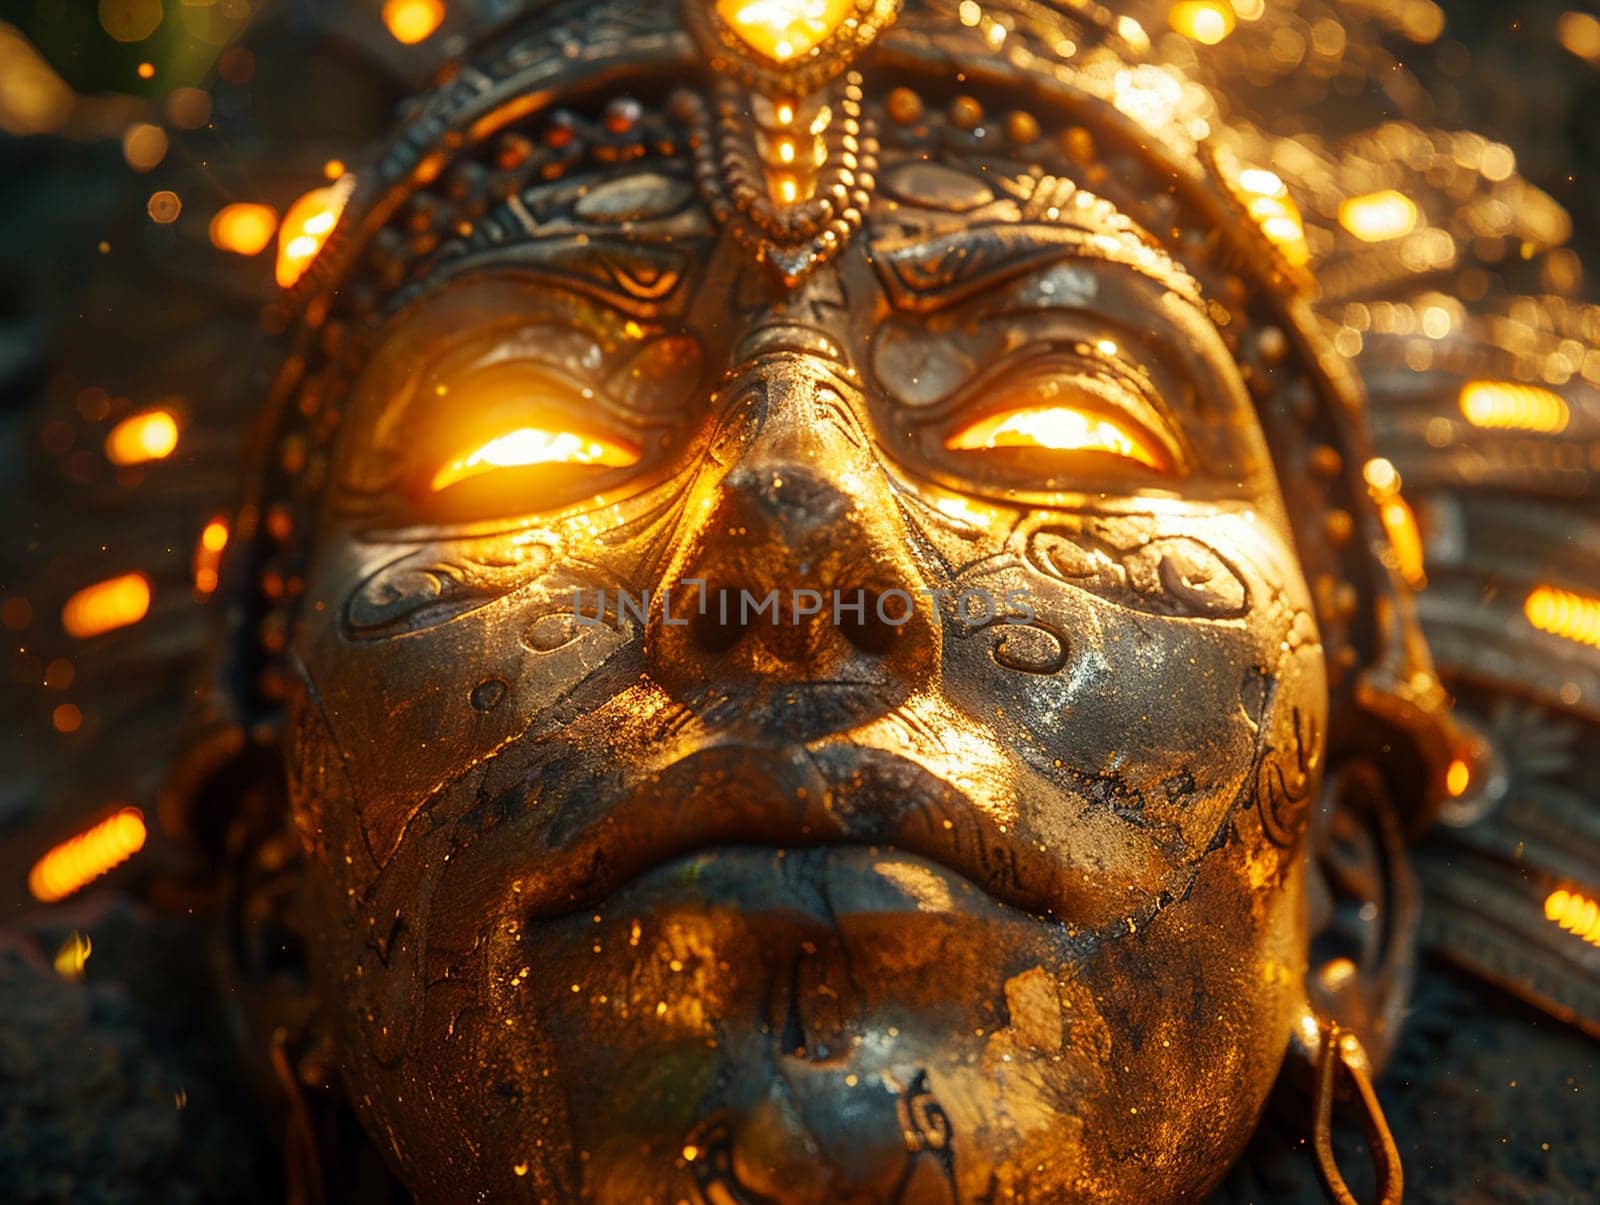 Sun God Inti Carvings Bathed in Golden Light, The deity's image blends with the stone, a testament to ancient reverence and power.